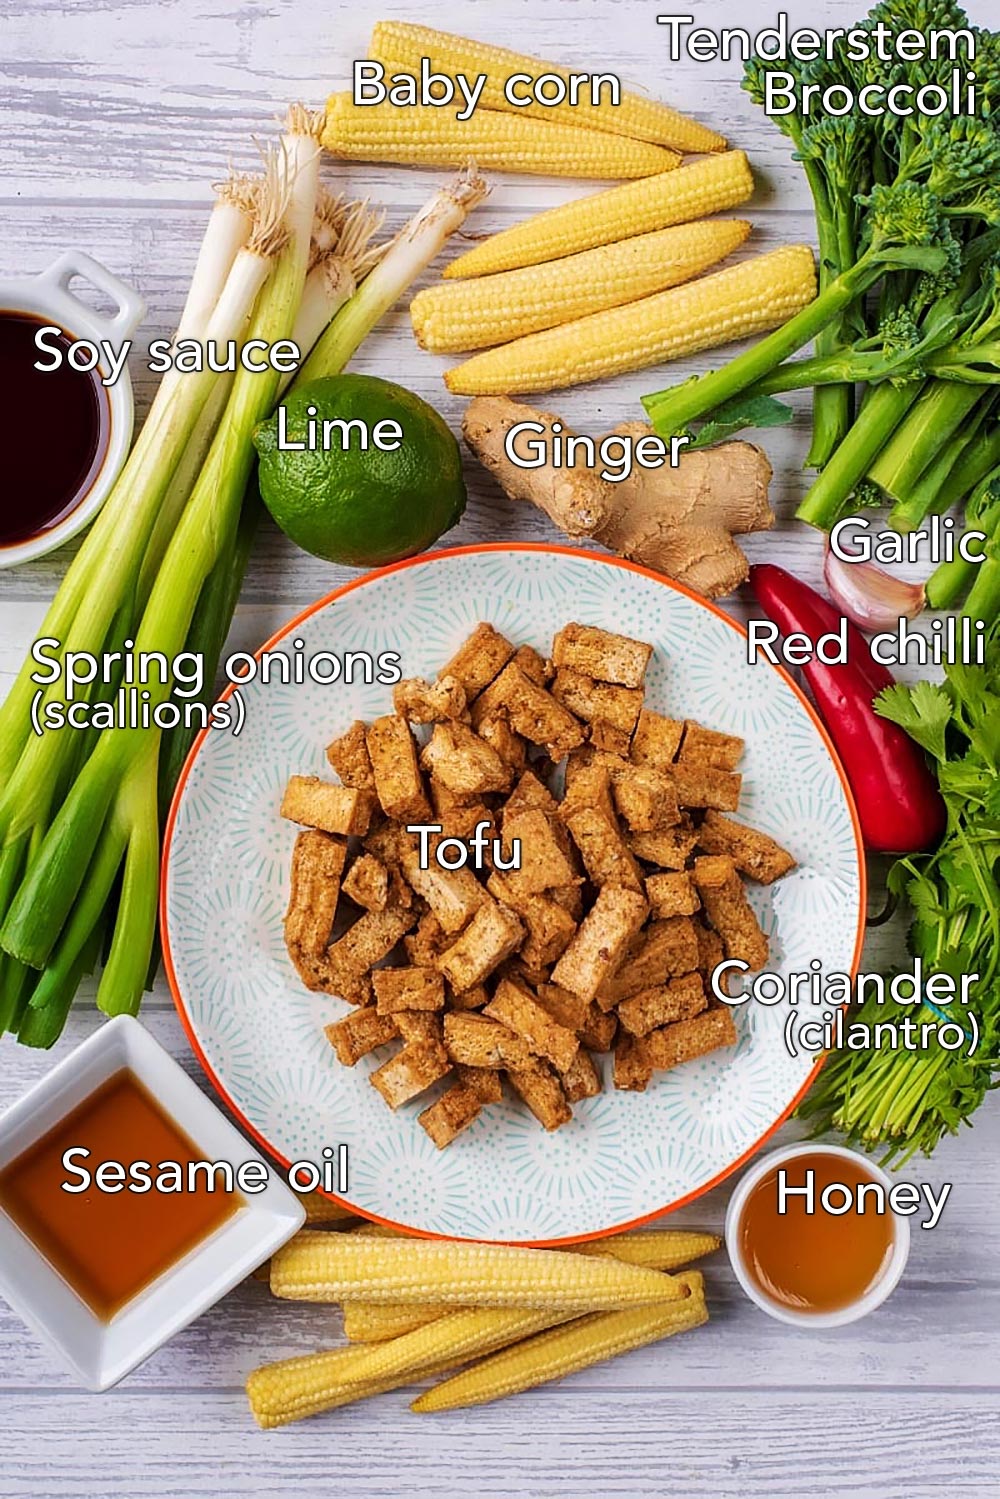 A plate of tofu surrounded by baby corn, spring onions, herbs and sauces.